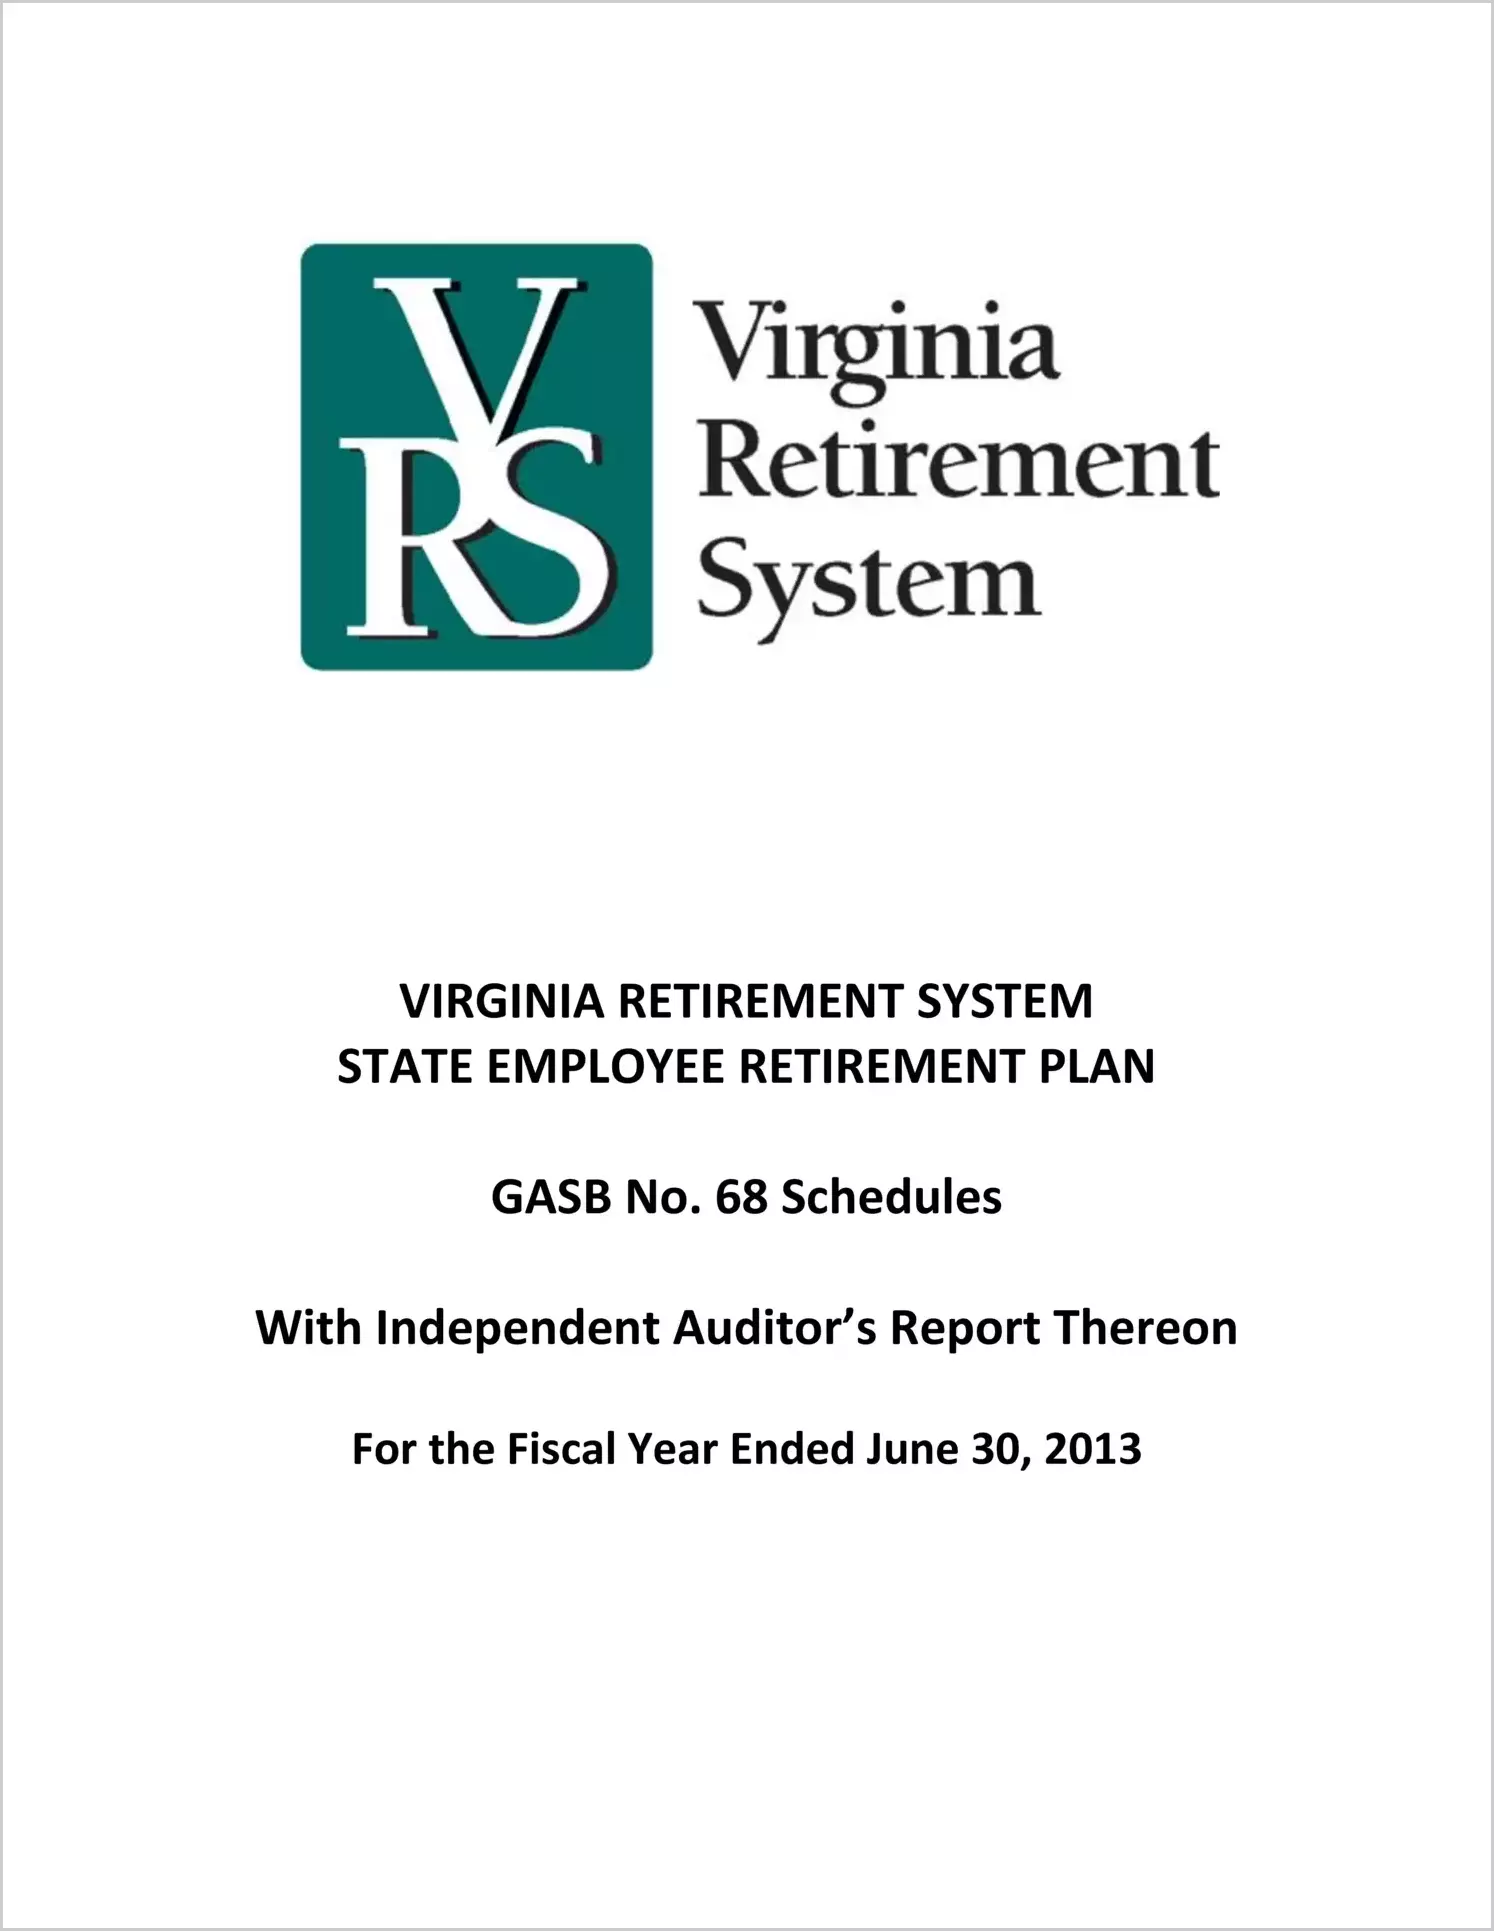 GASB 68 Schedule - State Employee Retirement Plan for the fiscal year ended June 30, 2013